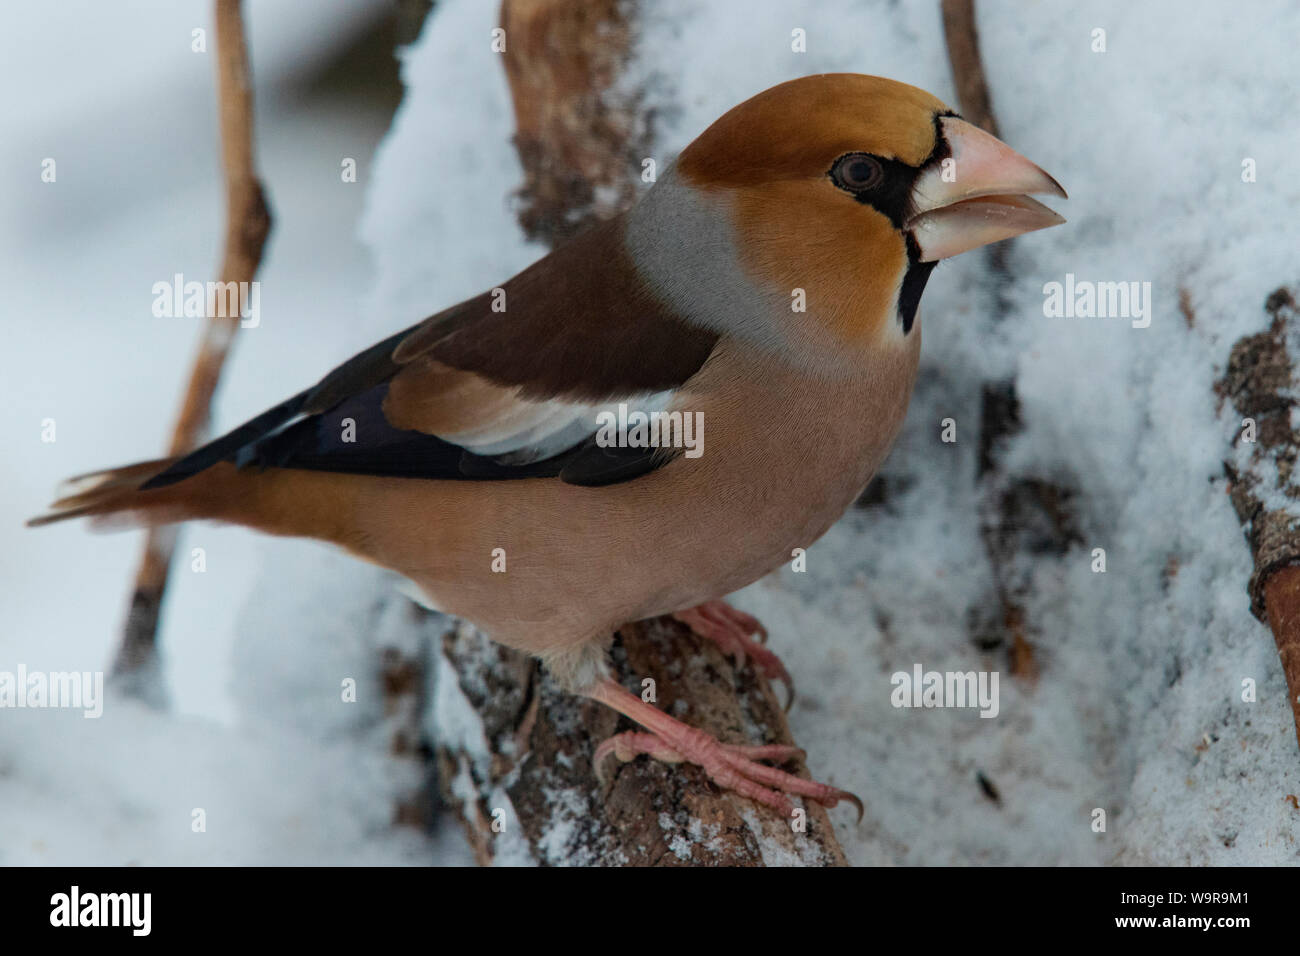 hawfinch, (Coccothraustes coccothraustes) Stock Photo